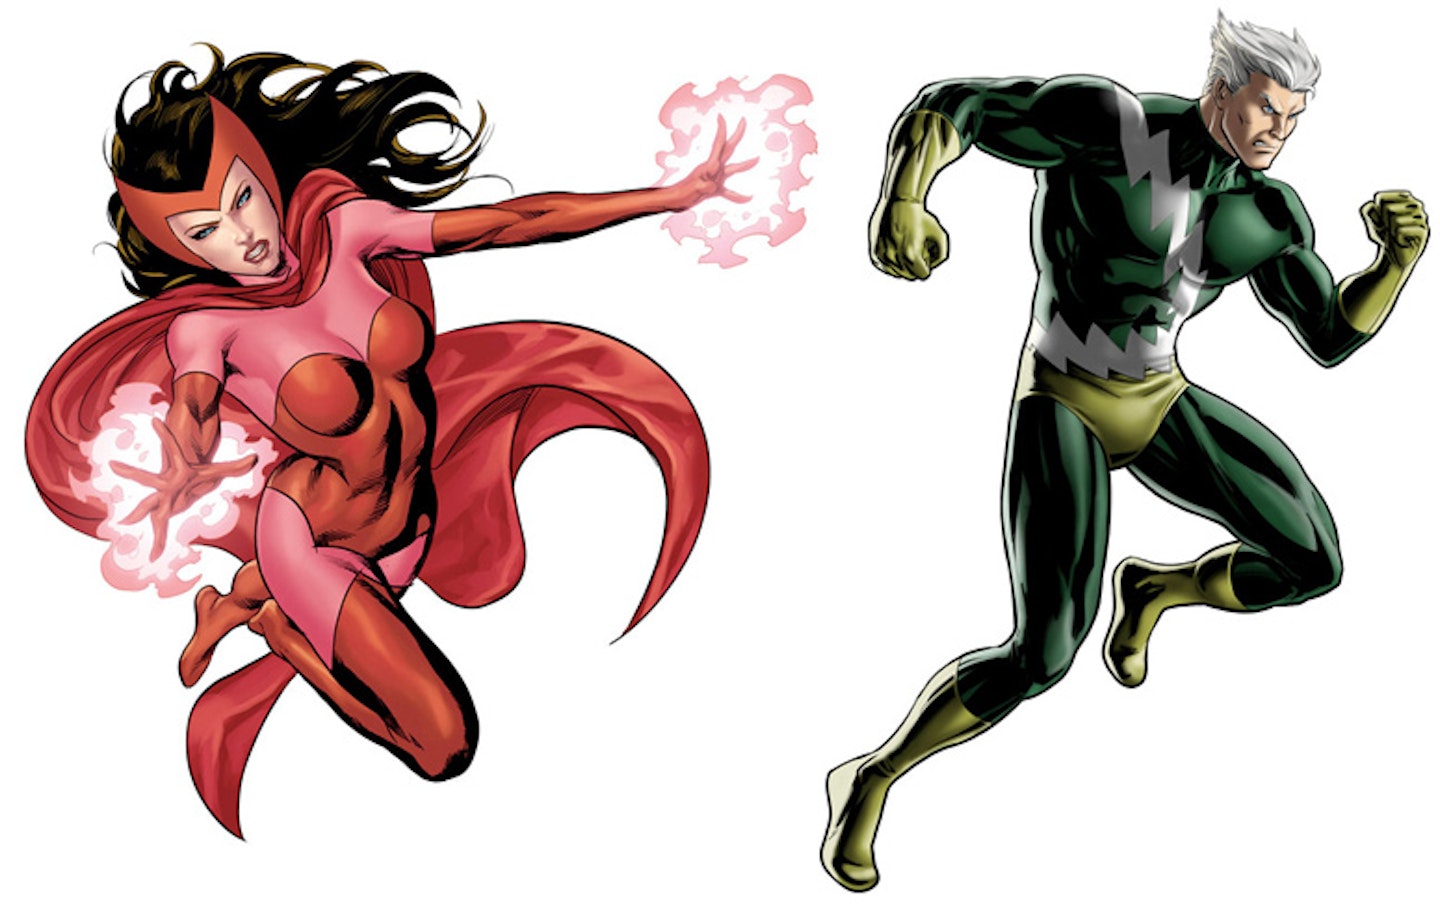 Scarlet Witch & Quicksilver from Marvel Comics